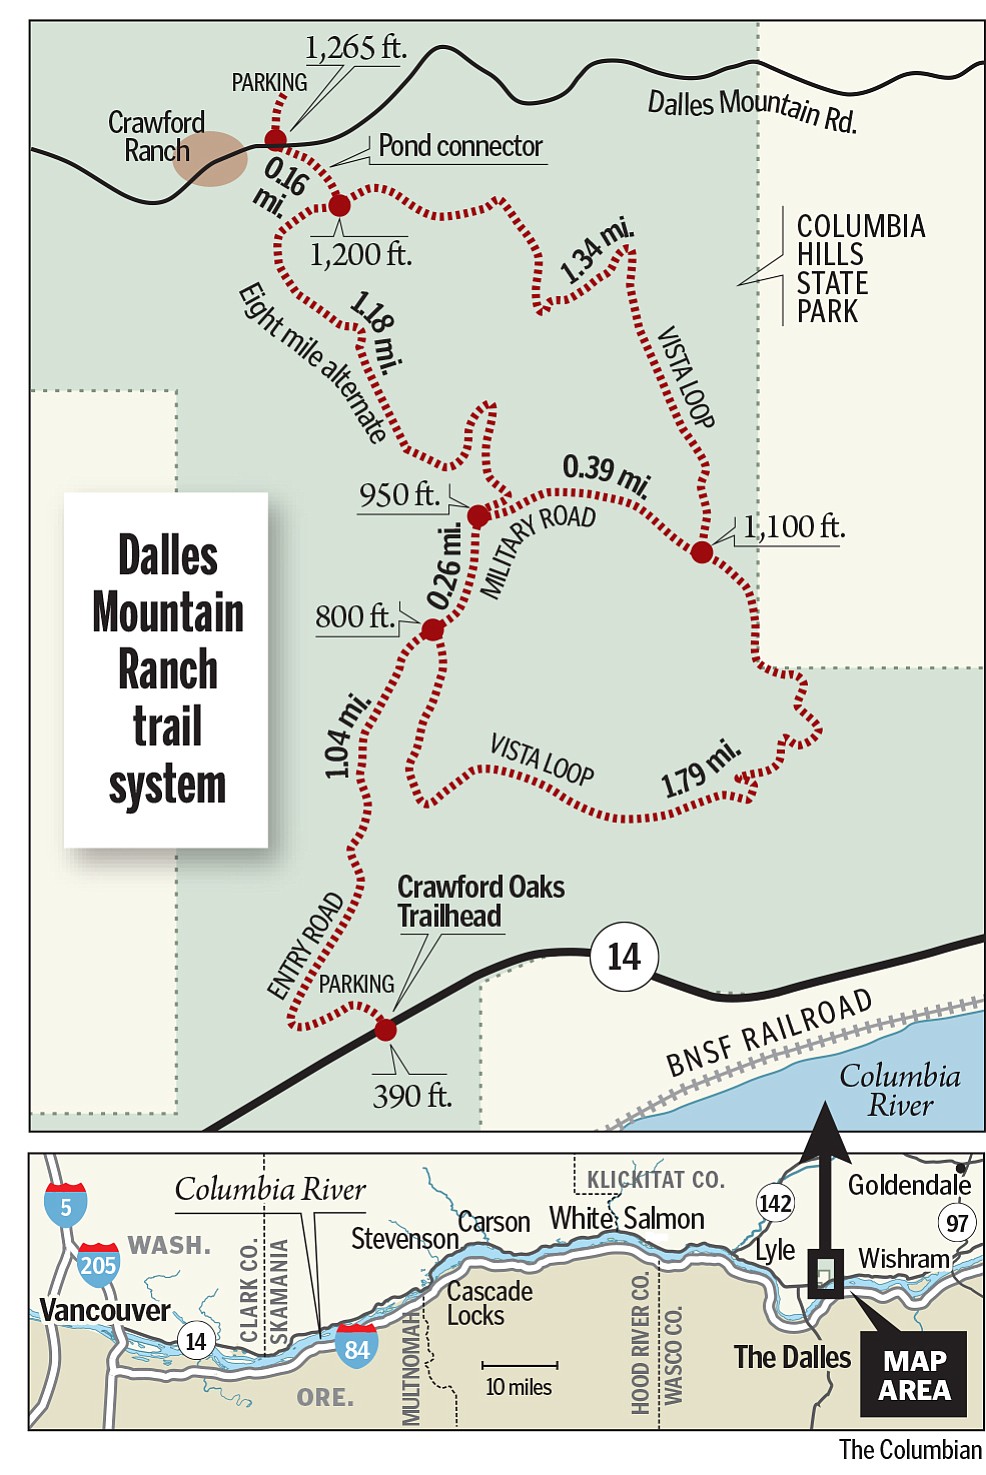 New trails at Columbia Hills State Park